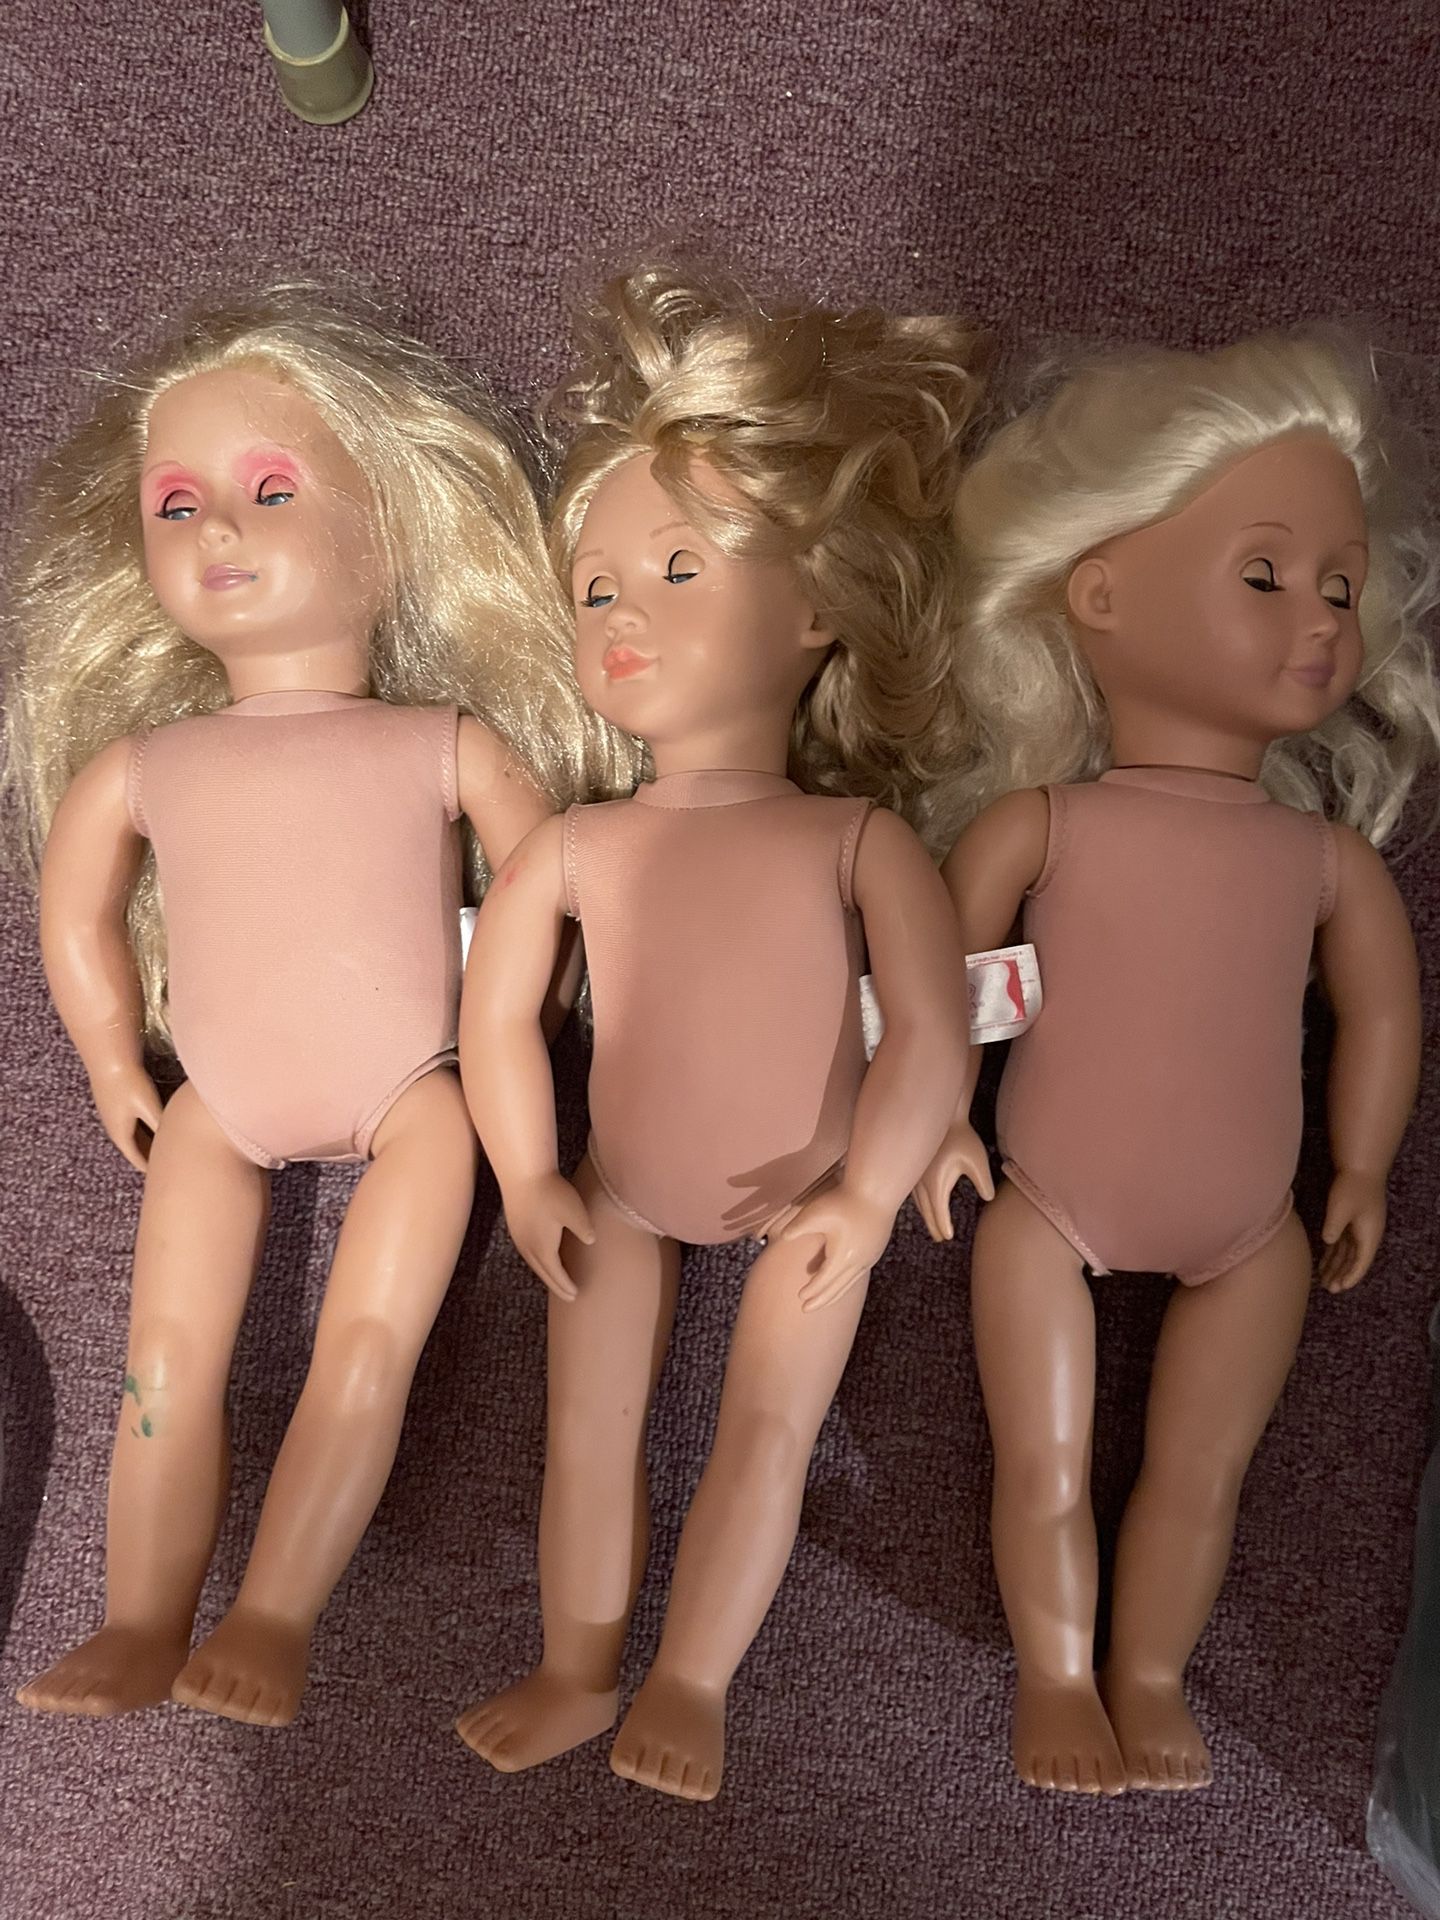 About 25 Dolls